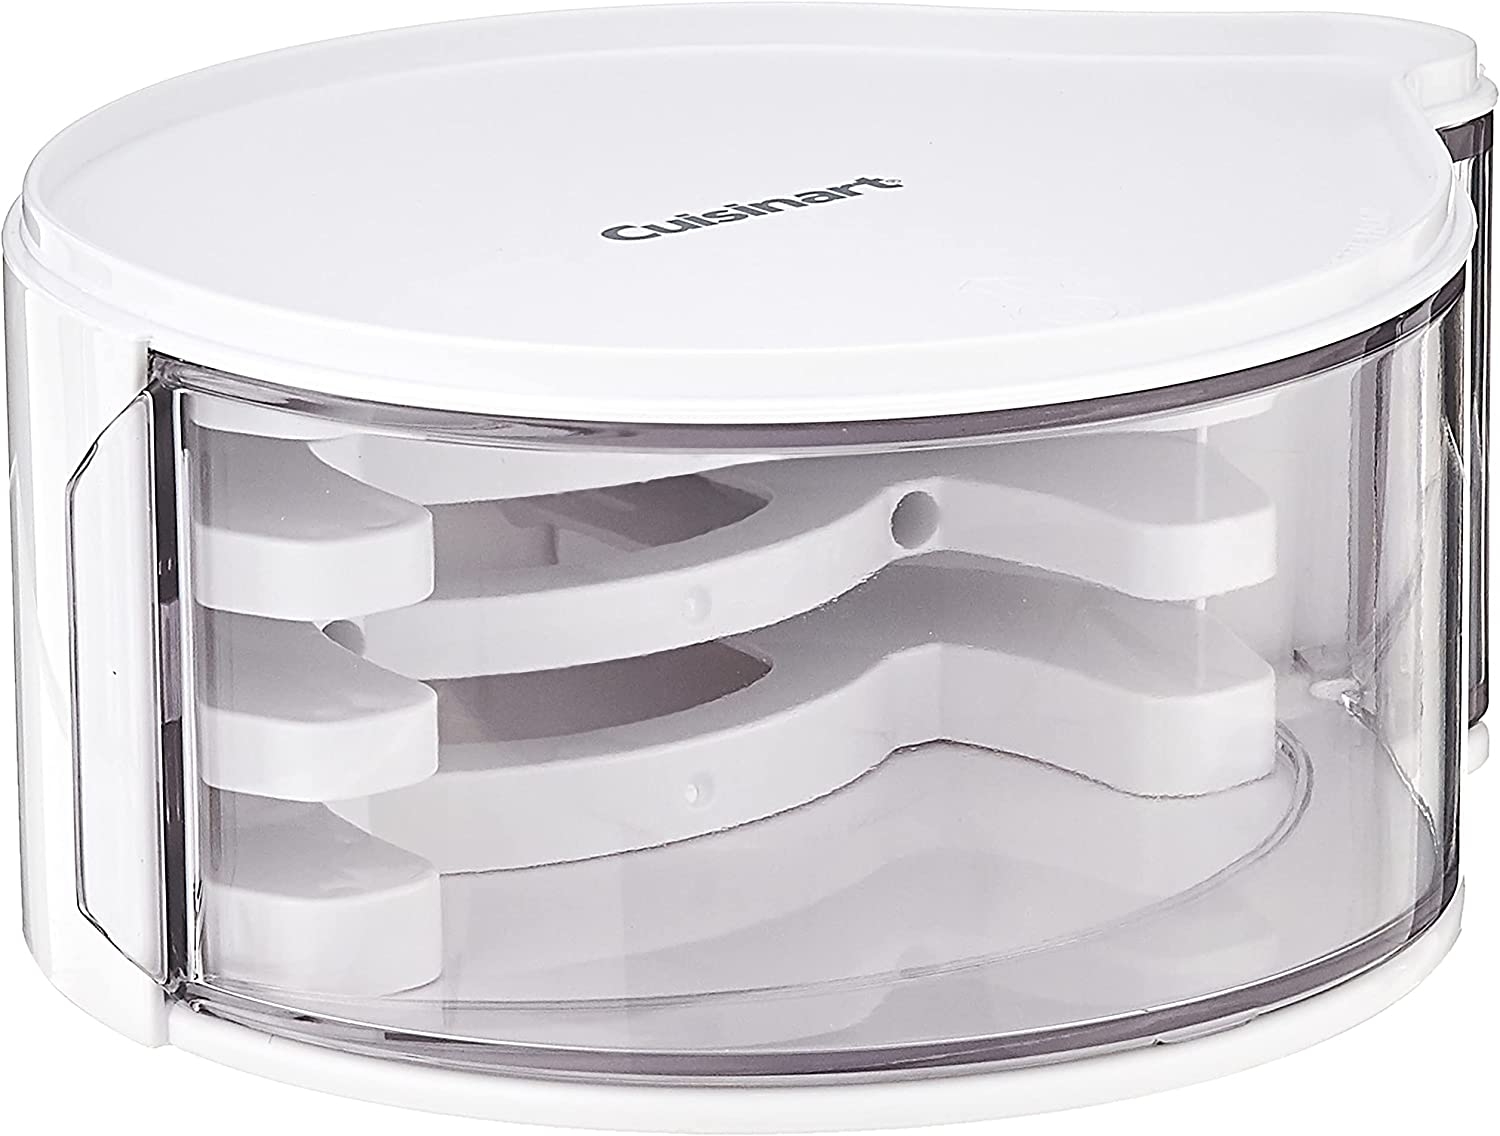 Cuisinart DLC-DH Disc Holder, White Import To Shop ×Product customization General Description Gallery Reviews Variations